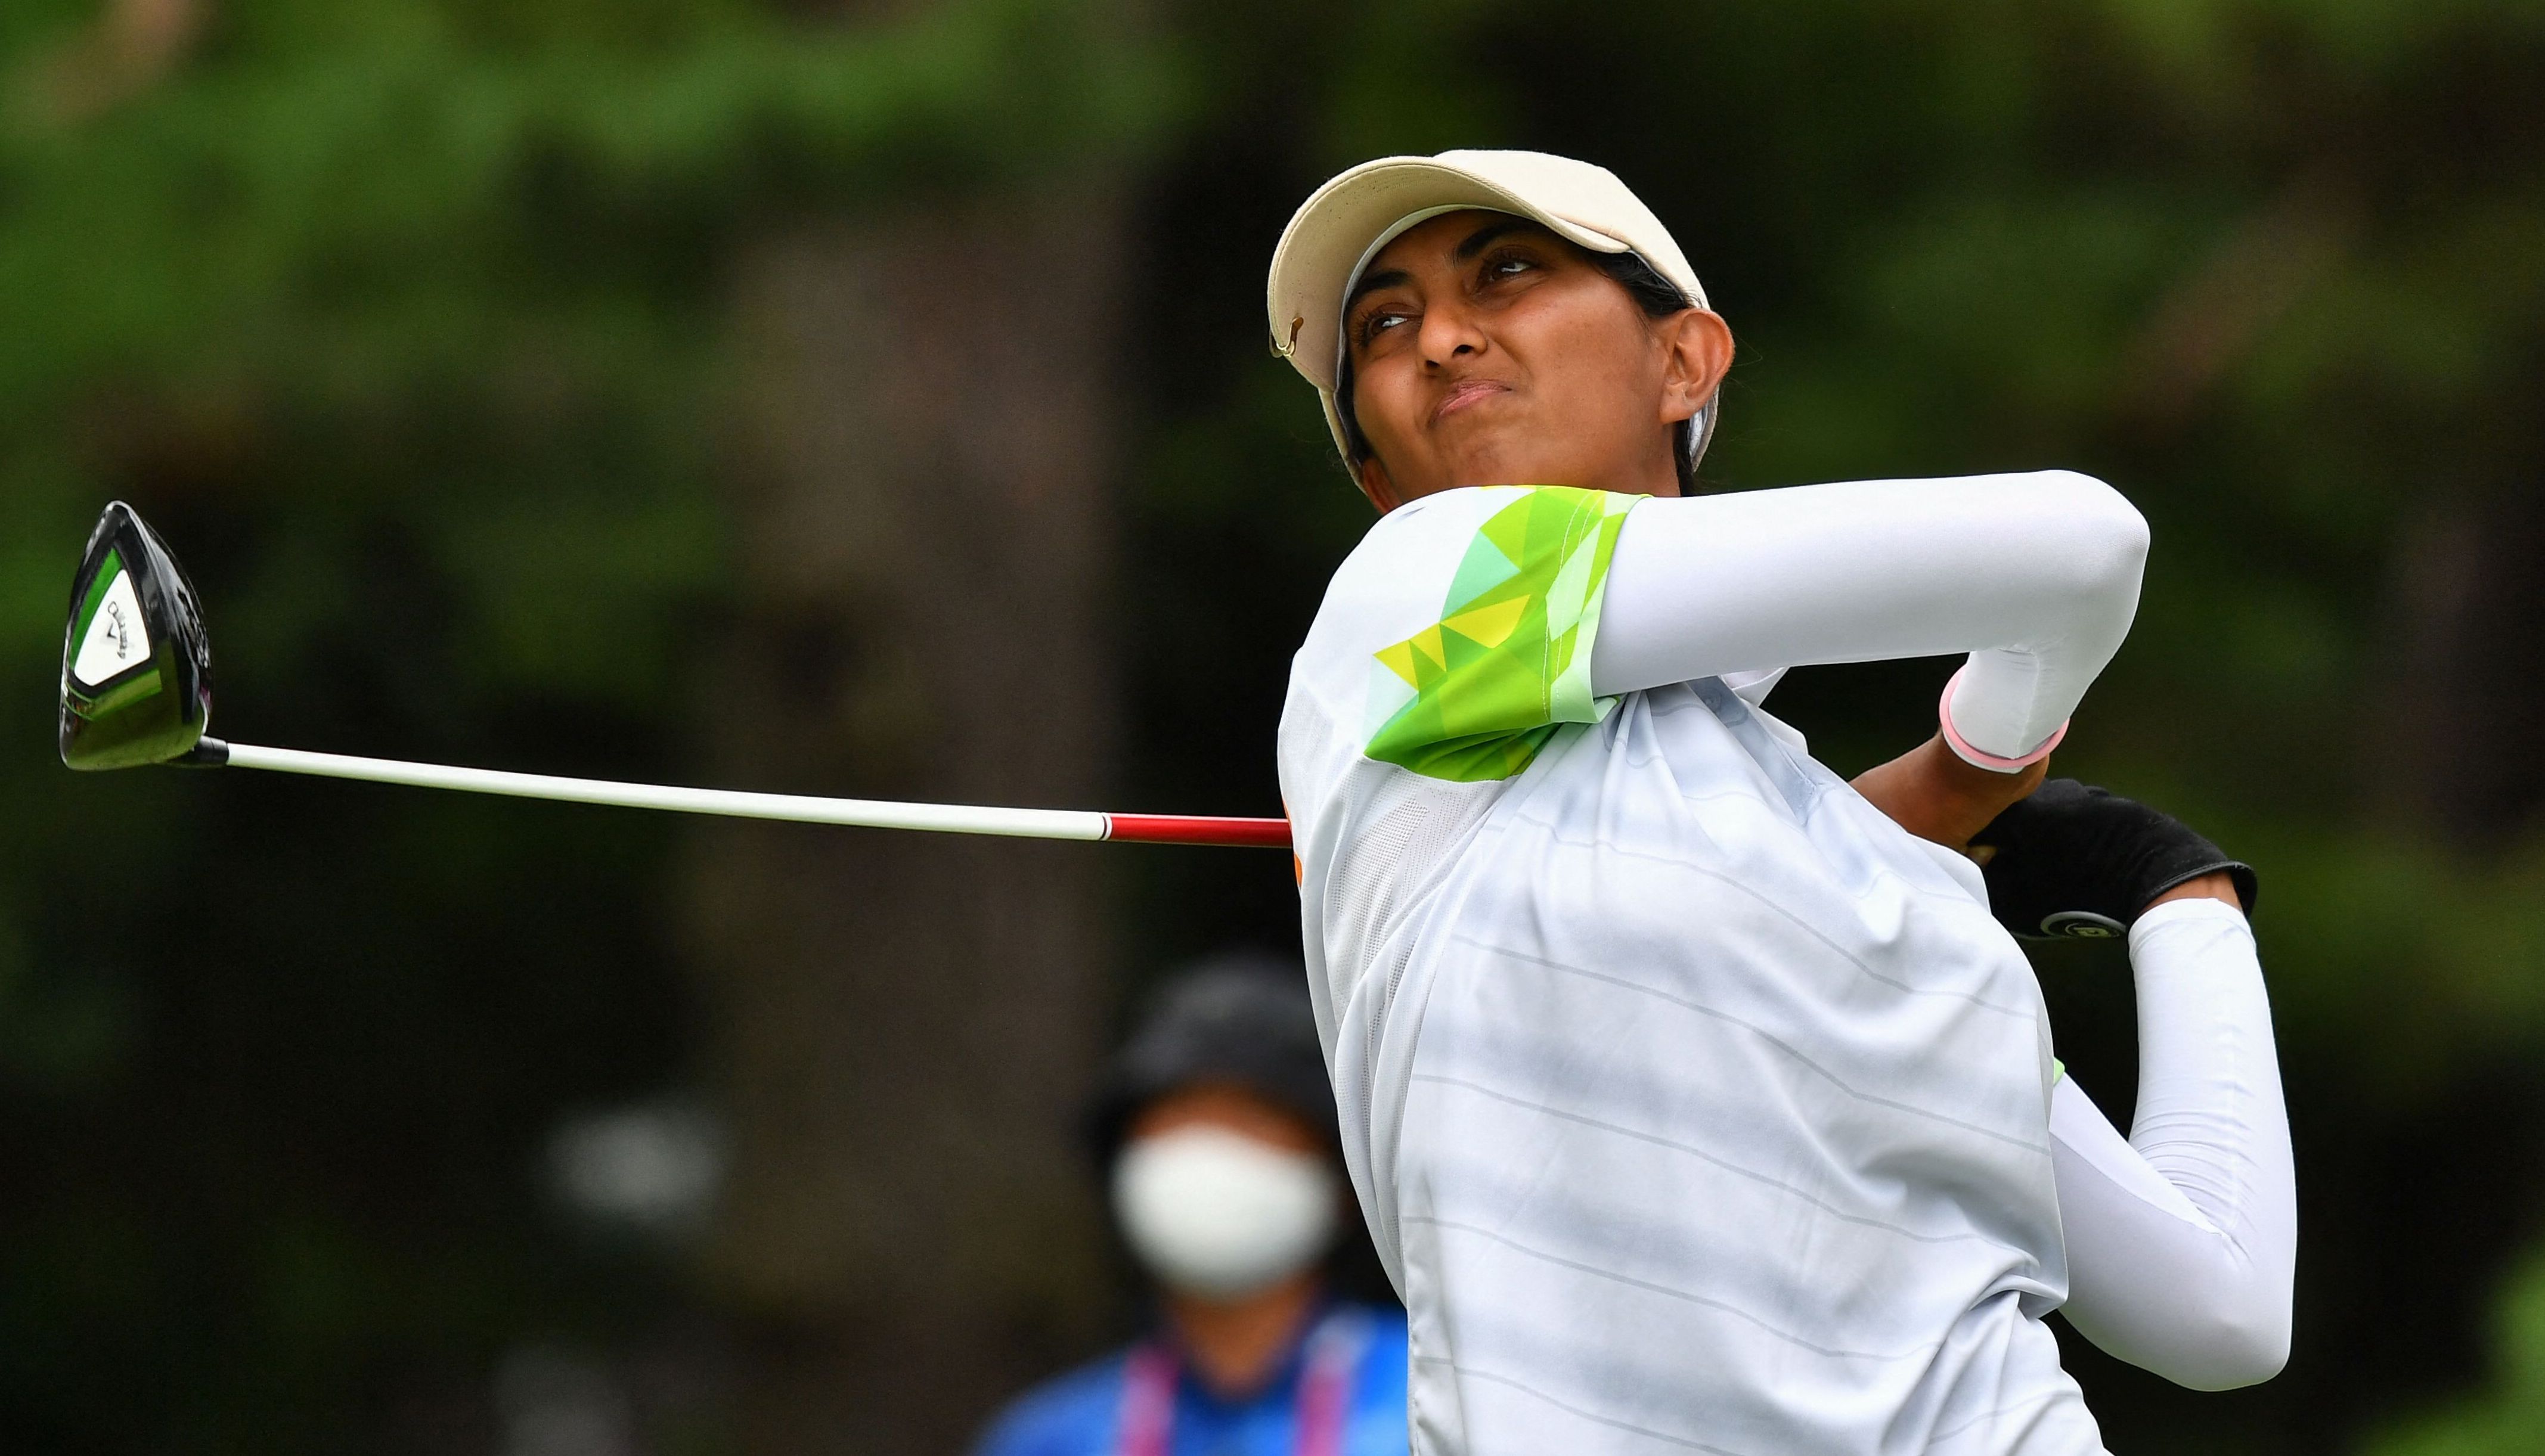 Aditi Ashok becomes first Indian female golfer in top 50